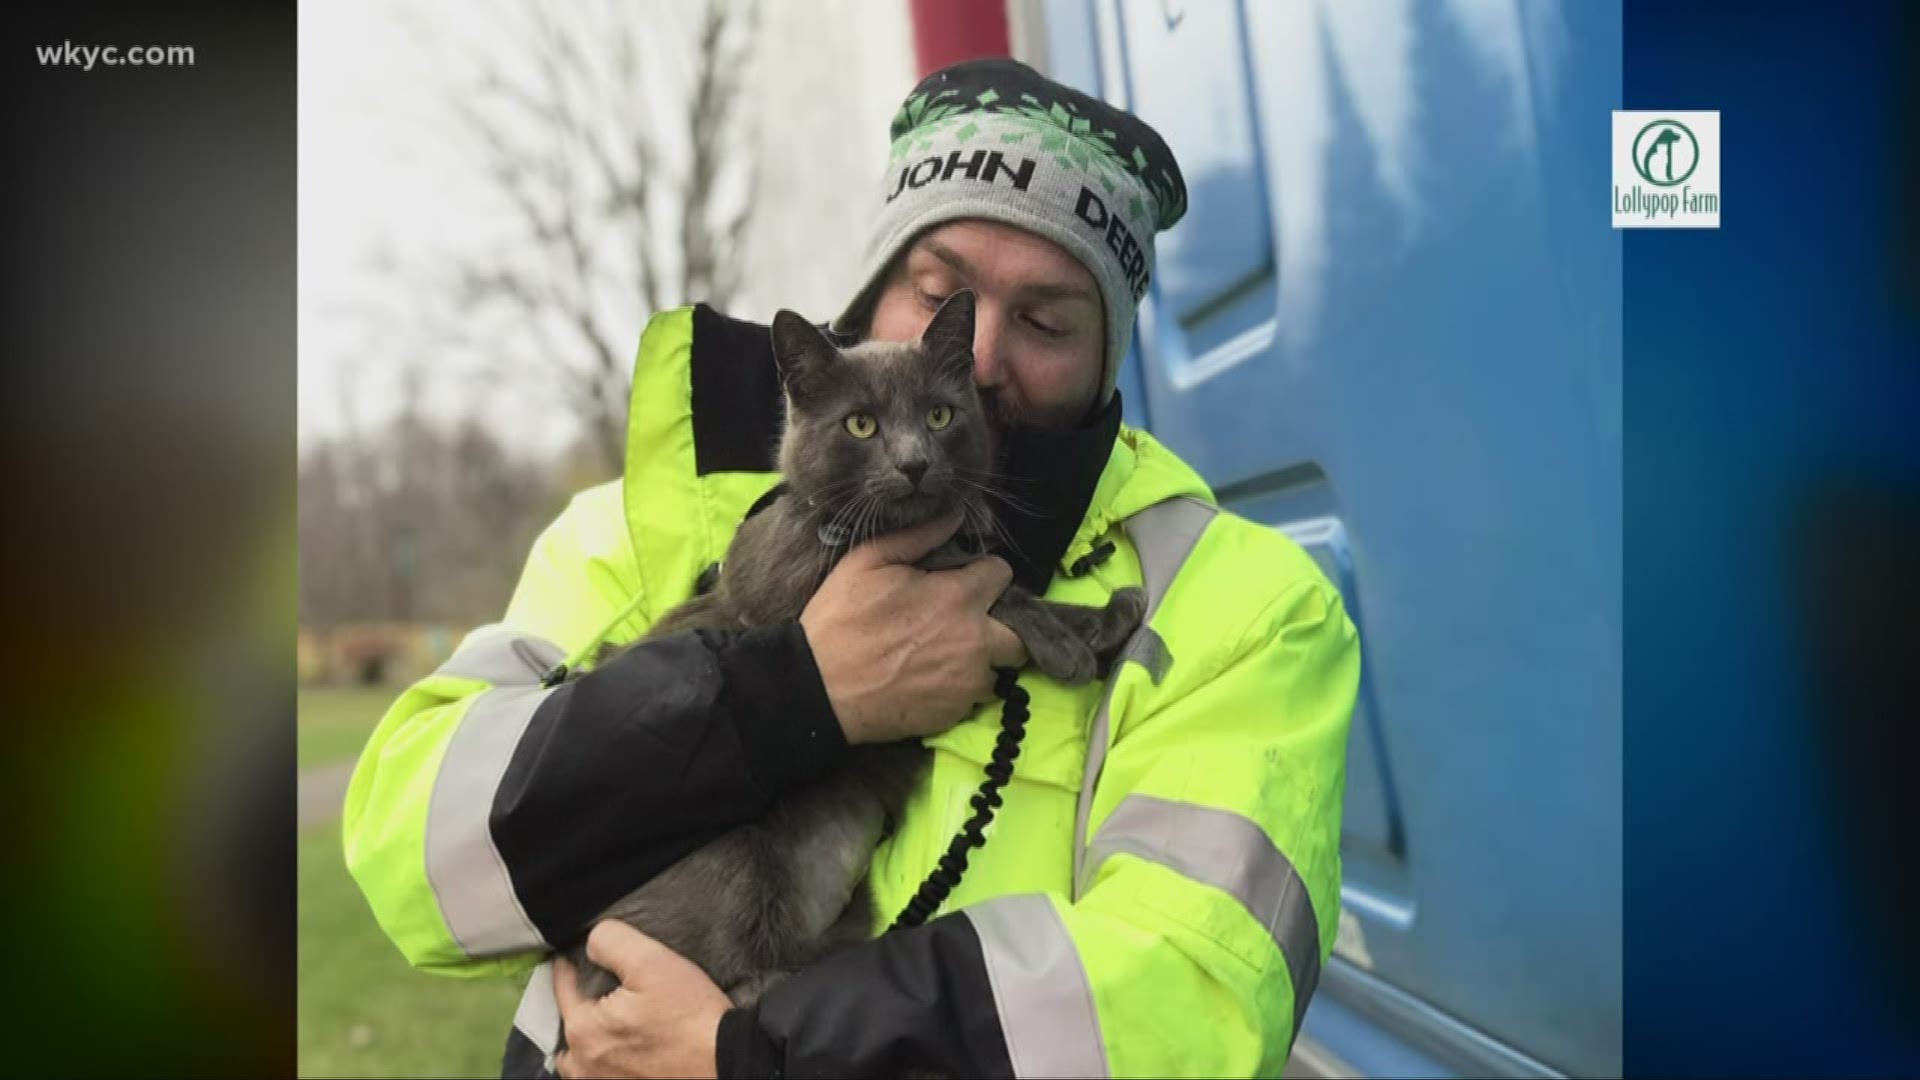 Officials were able to locate the feline's home thanks to an implanted microchip.